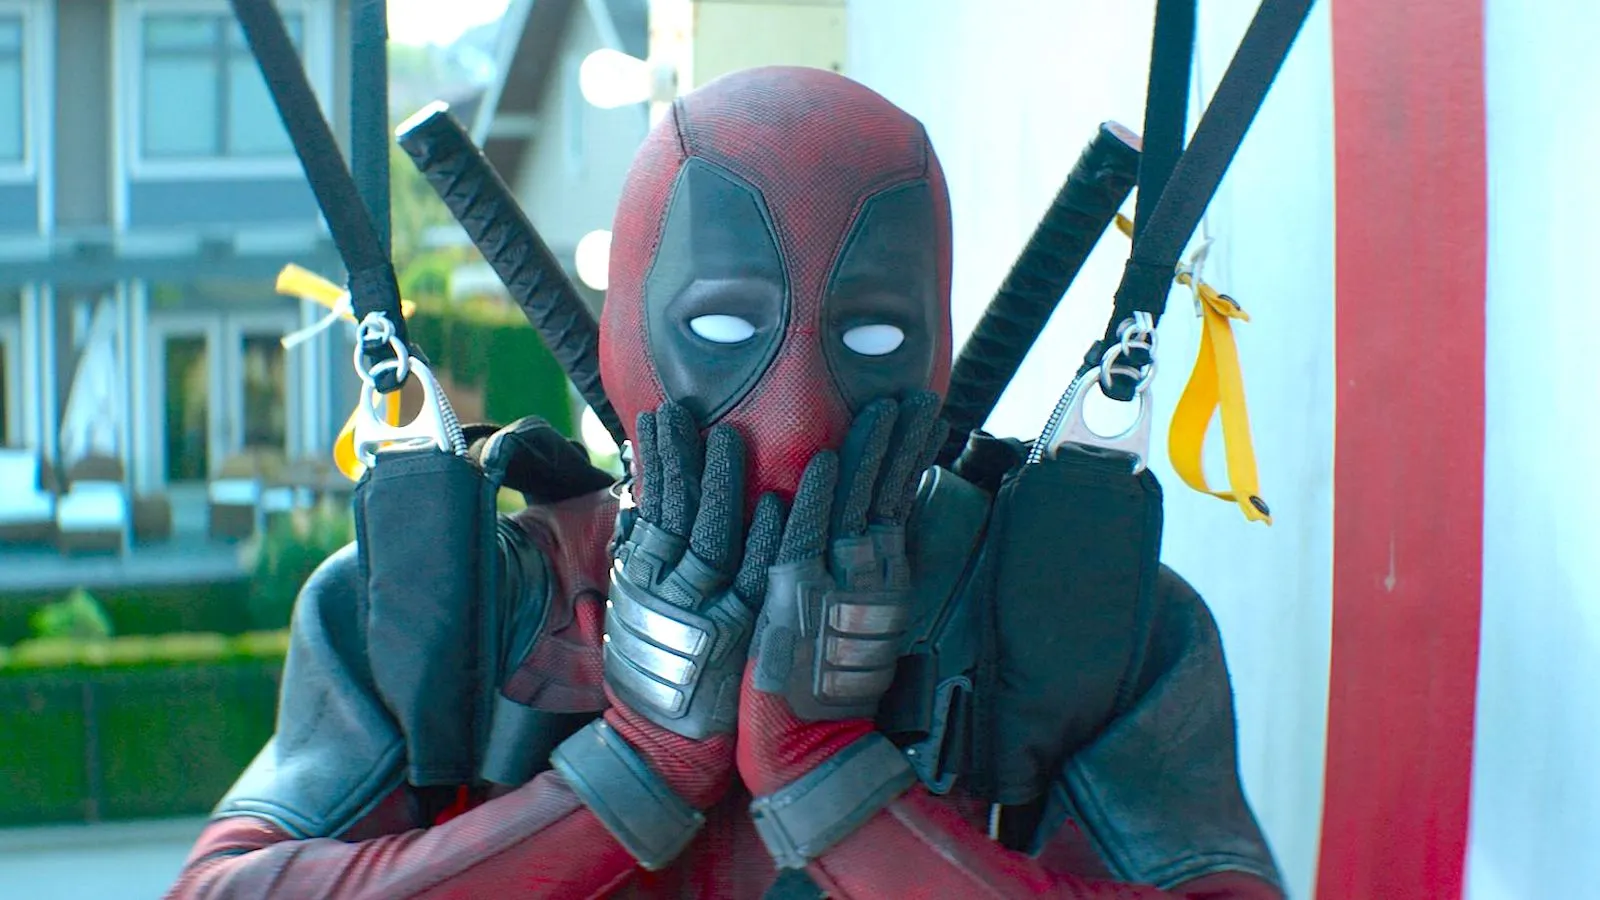 Ryan Reynolds as Deadpool, covering his masked mouth in a shocked expression